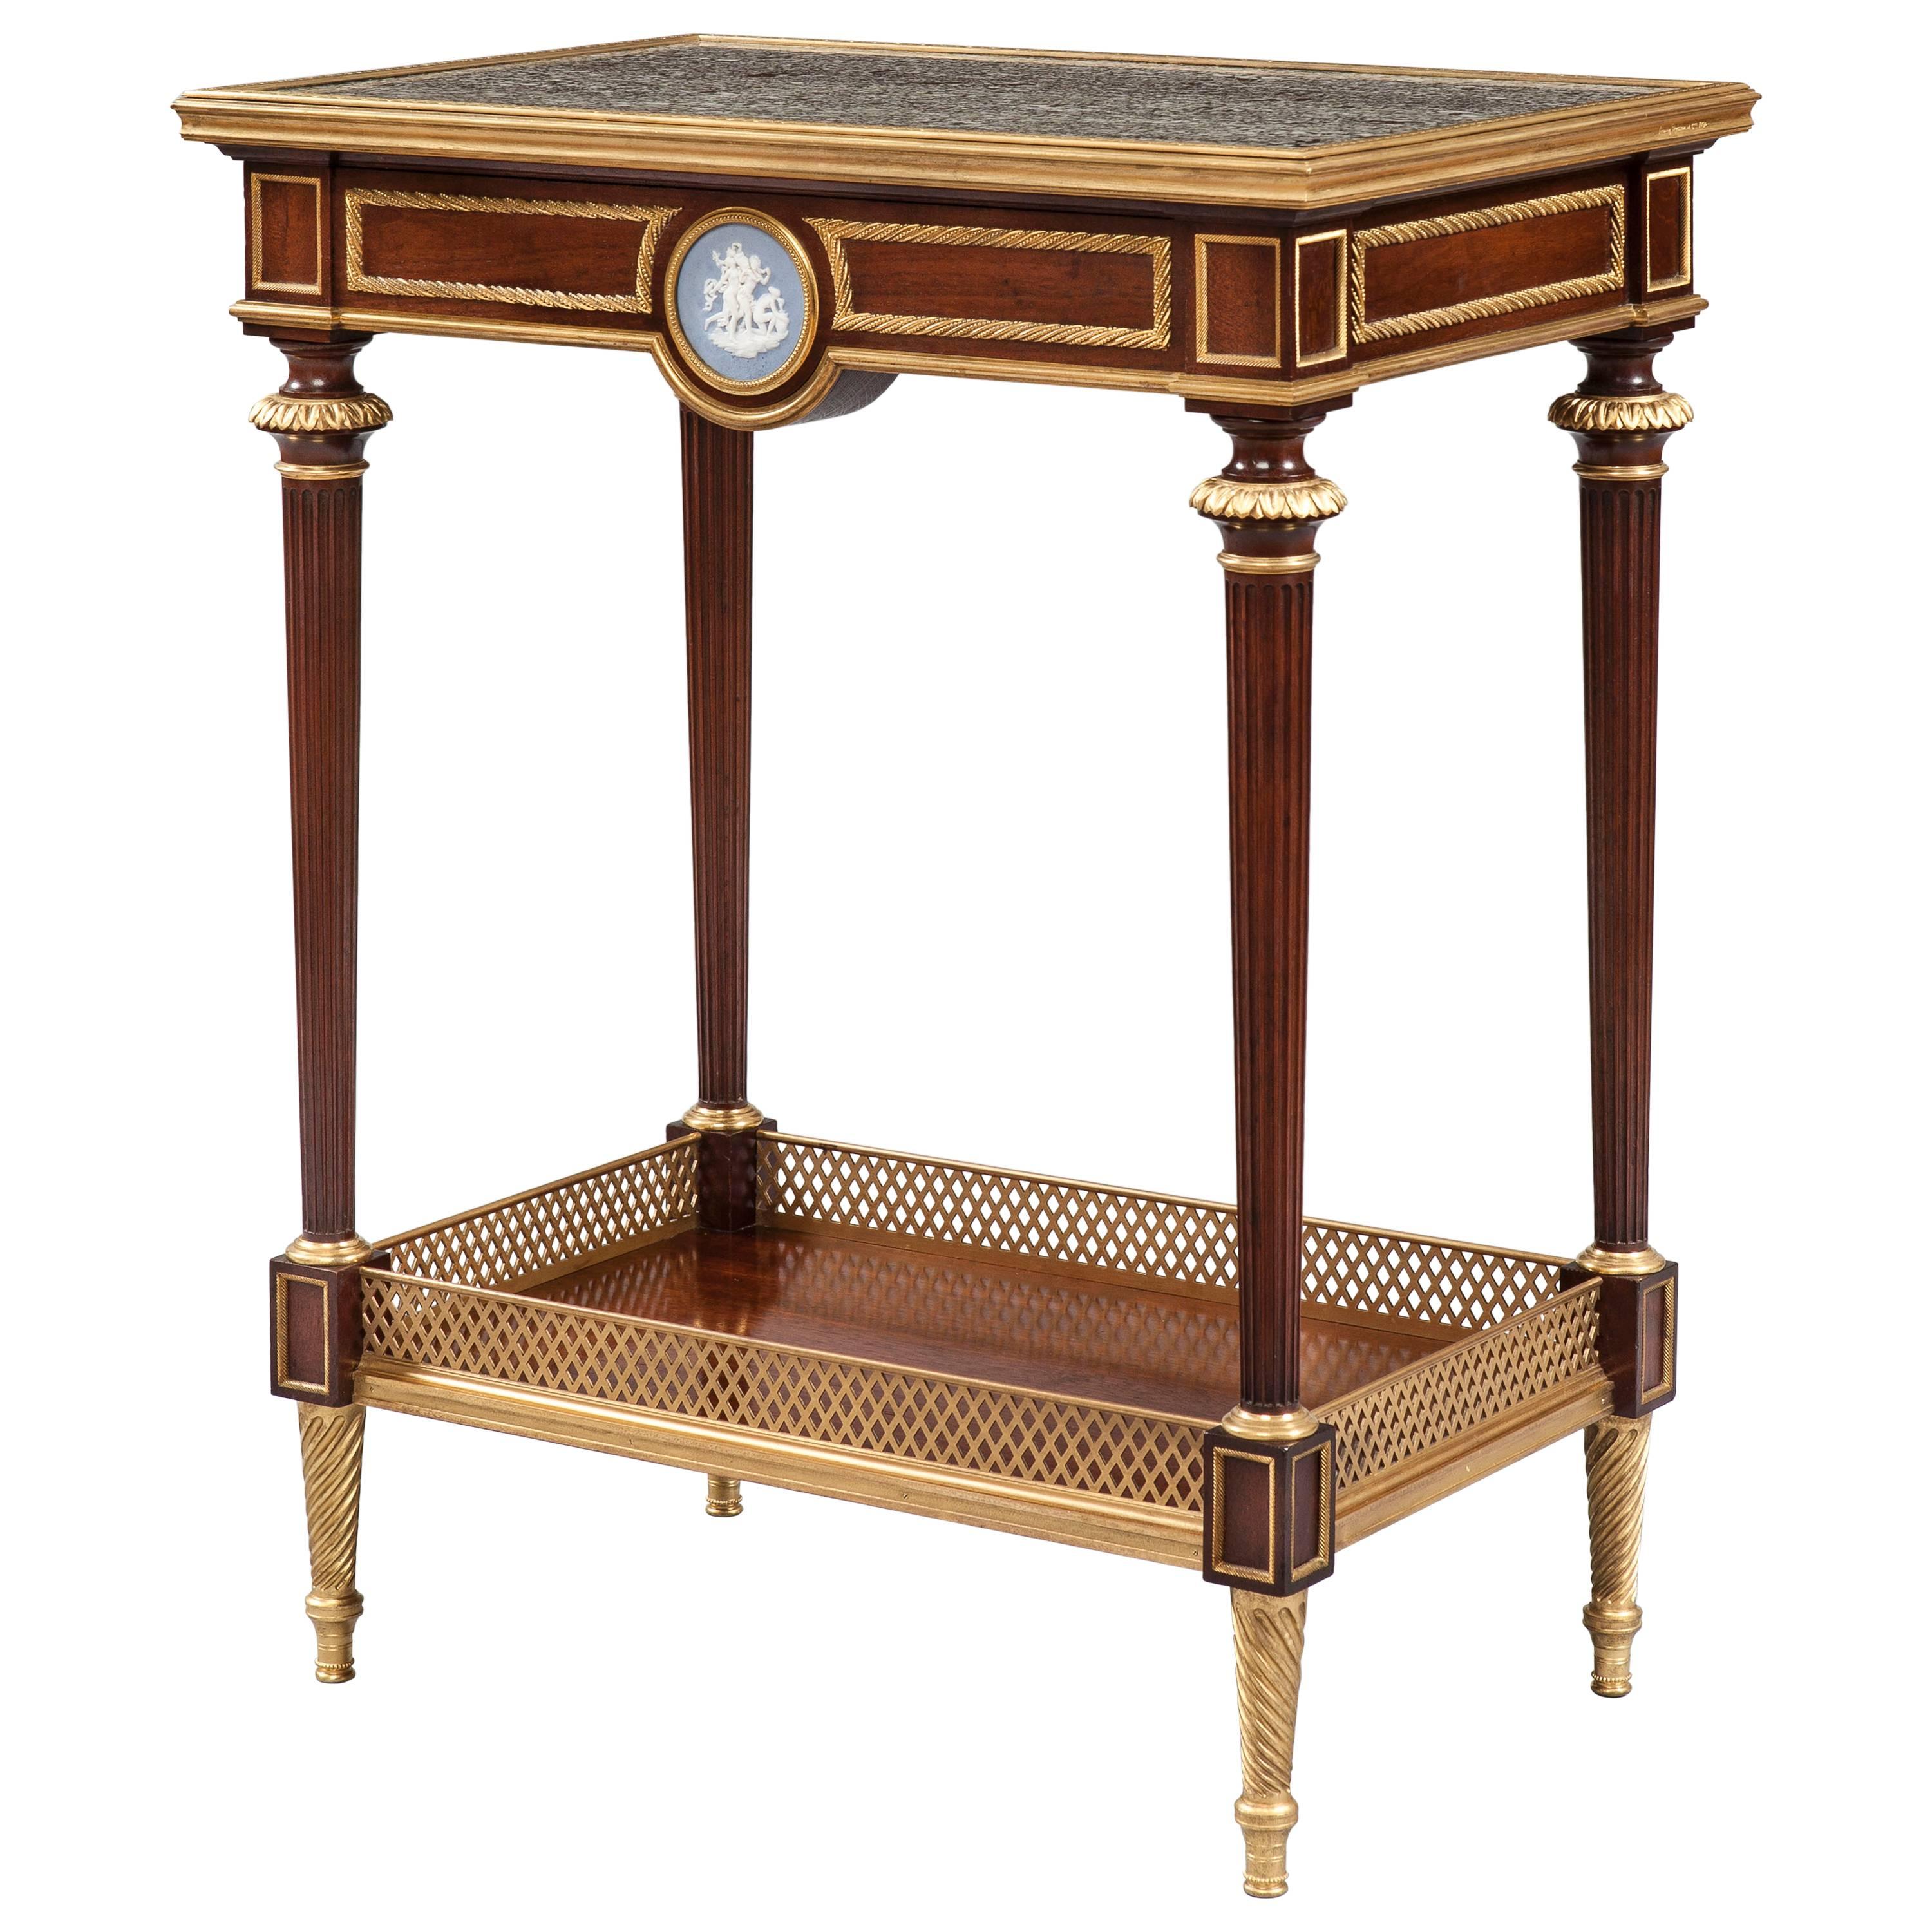 French 19th Century Mahogany and Gilt Table with Plaque in the Wedgwood Manner